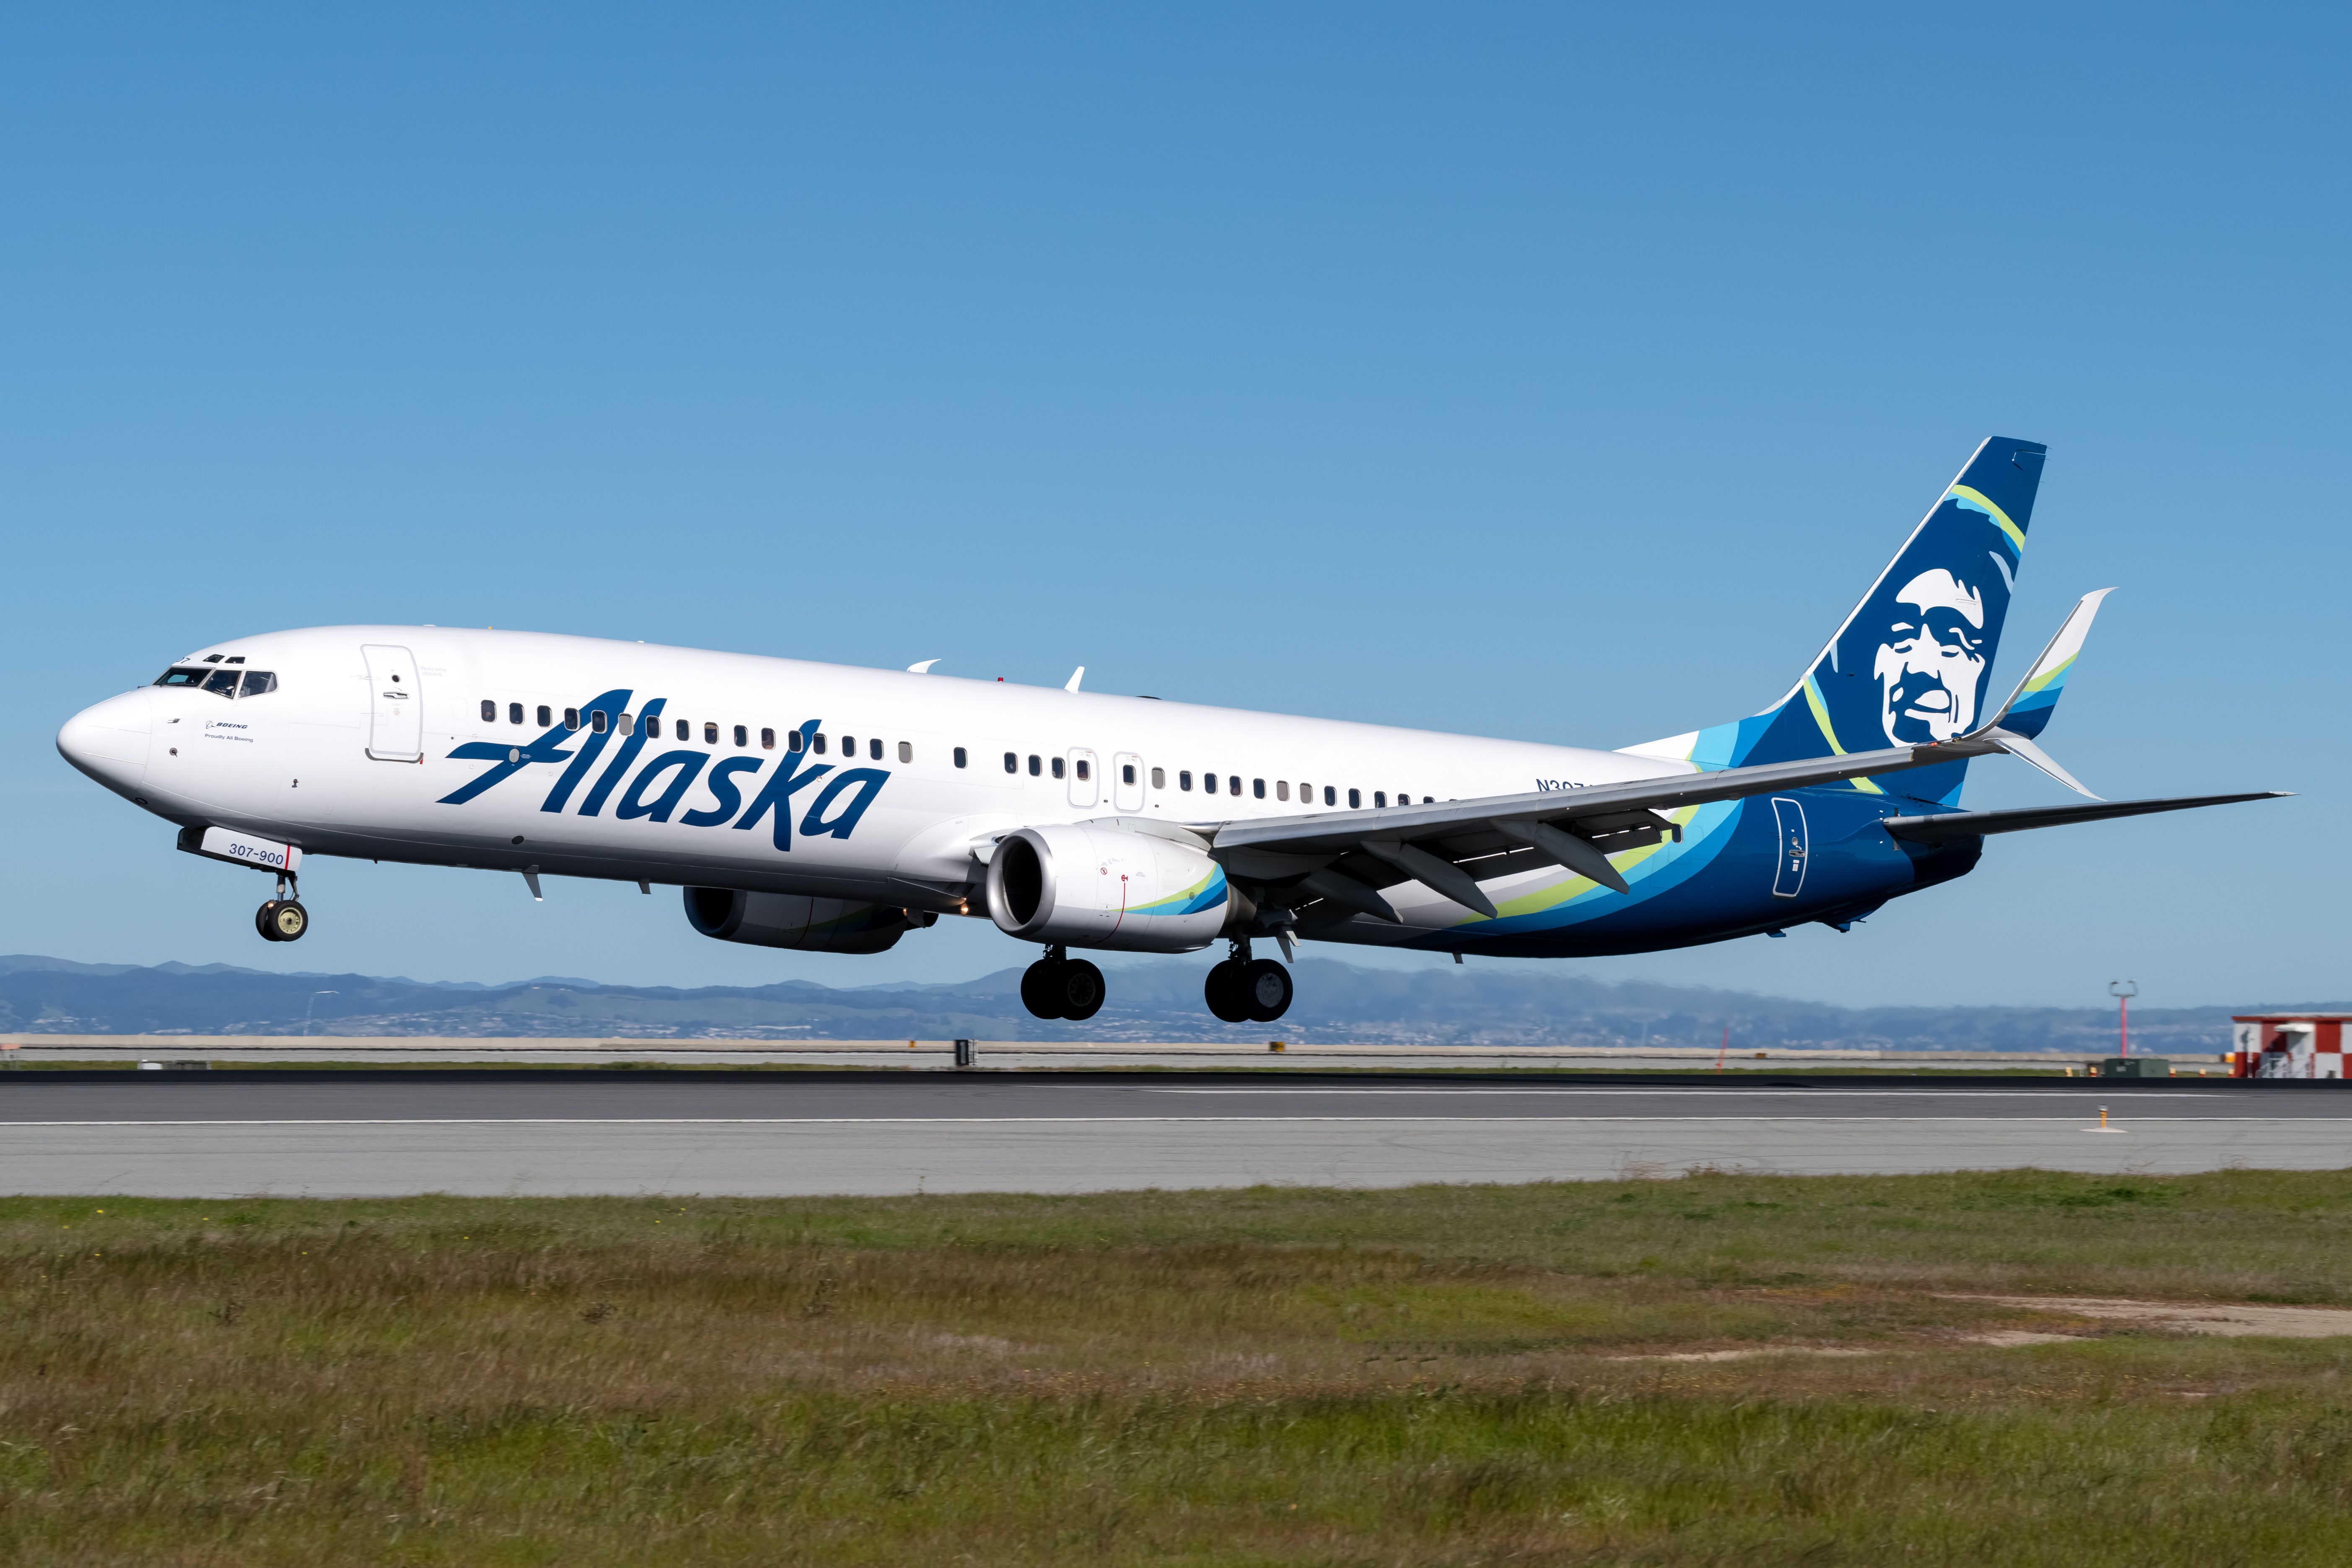 The Story Of Alaska Airlines' New Airport Operations & Customer Service VP